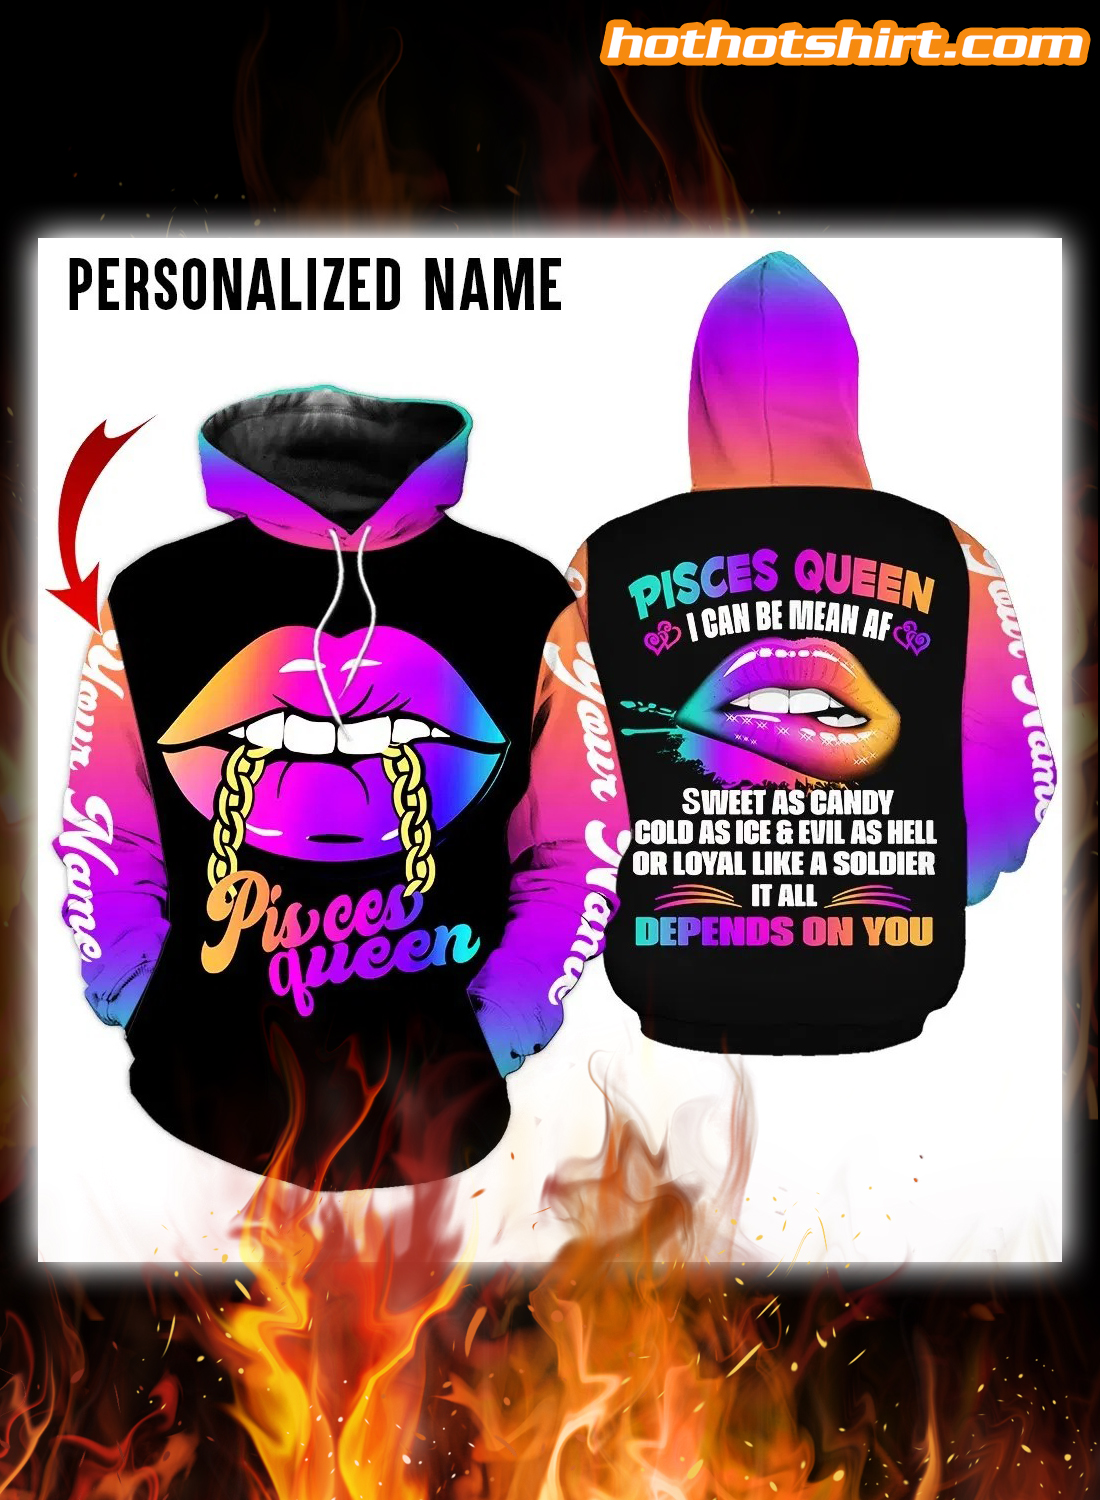 Personalized Name Pisces Queen I Can Be Mean AF 3D Hoodie and Legging